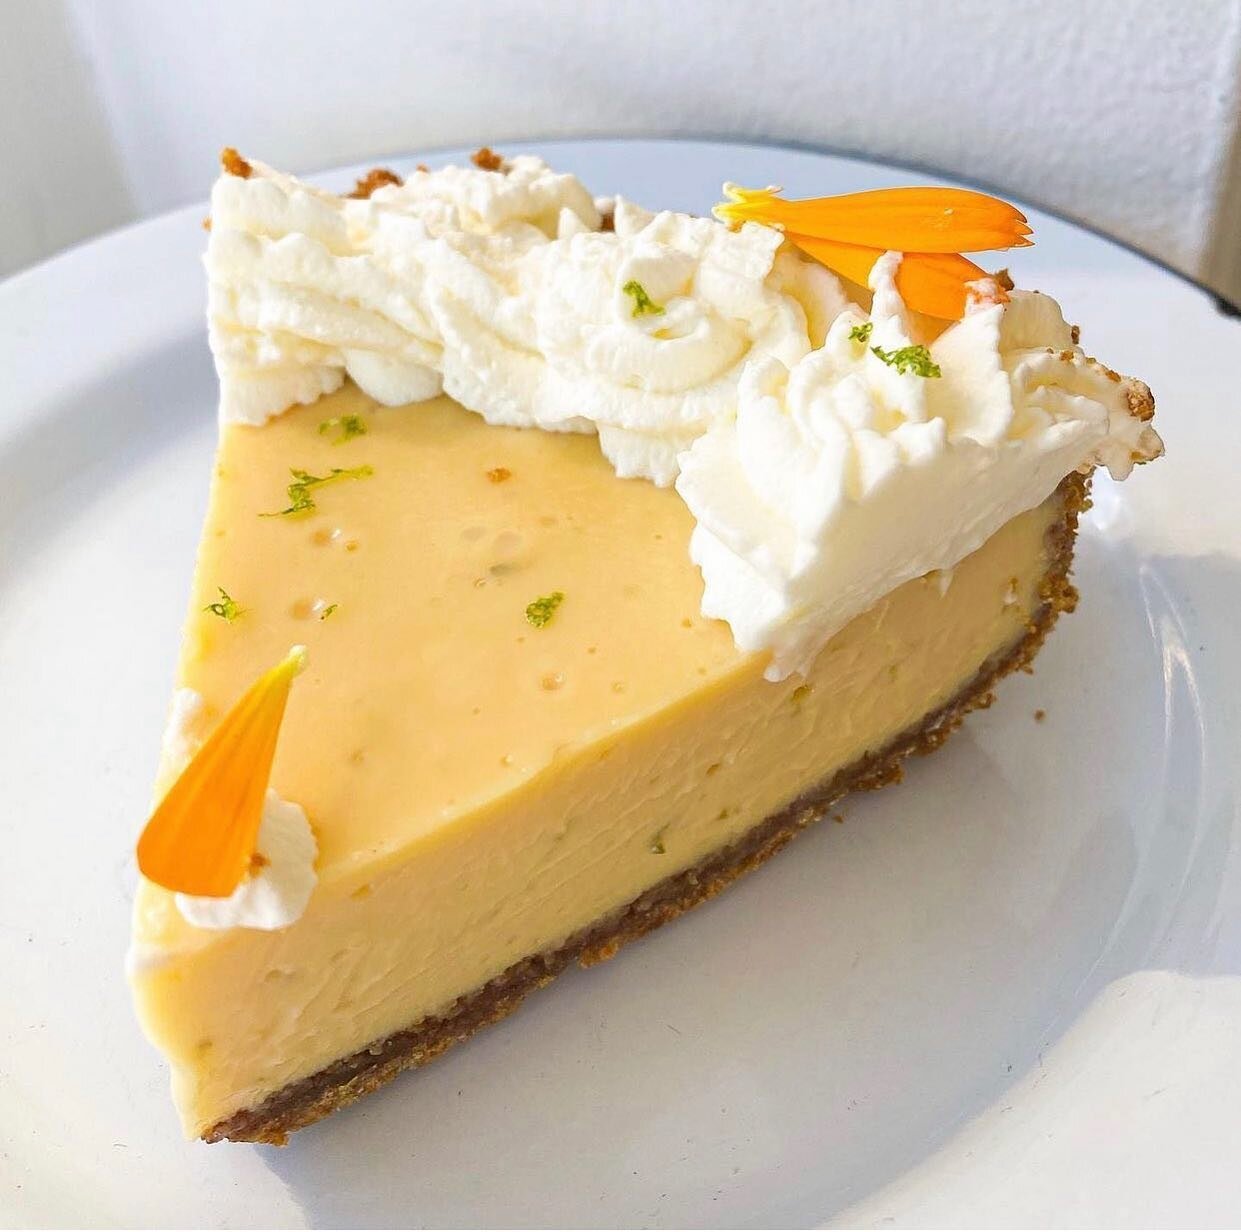 Our Thanksgiving 🦃 and 🥧 preorders are live a little early this year! (Link in bio). For the first time ever, we&rsquo;re making our key lime pie for Thanksgiving (you&rsquo;re welcome, mom and dad). Can you believe this will be our 9th year on the